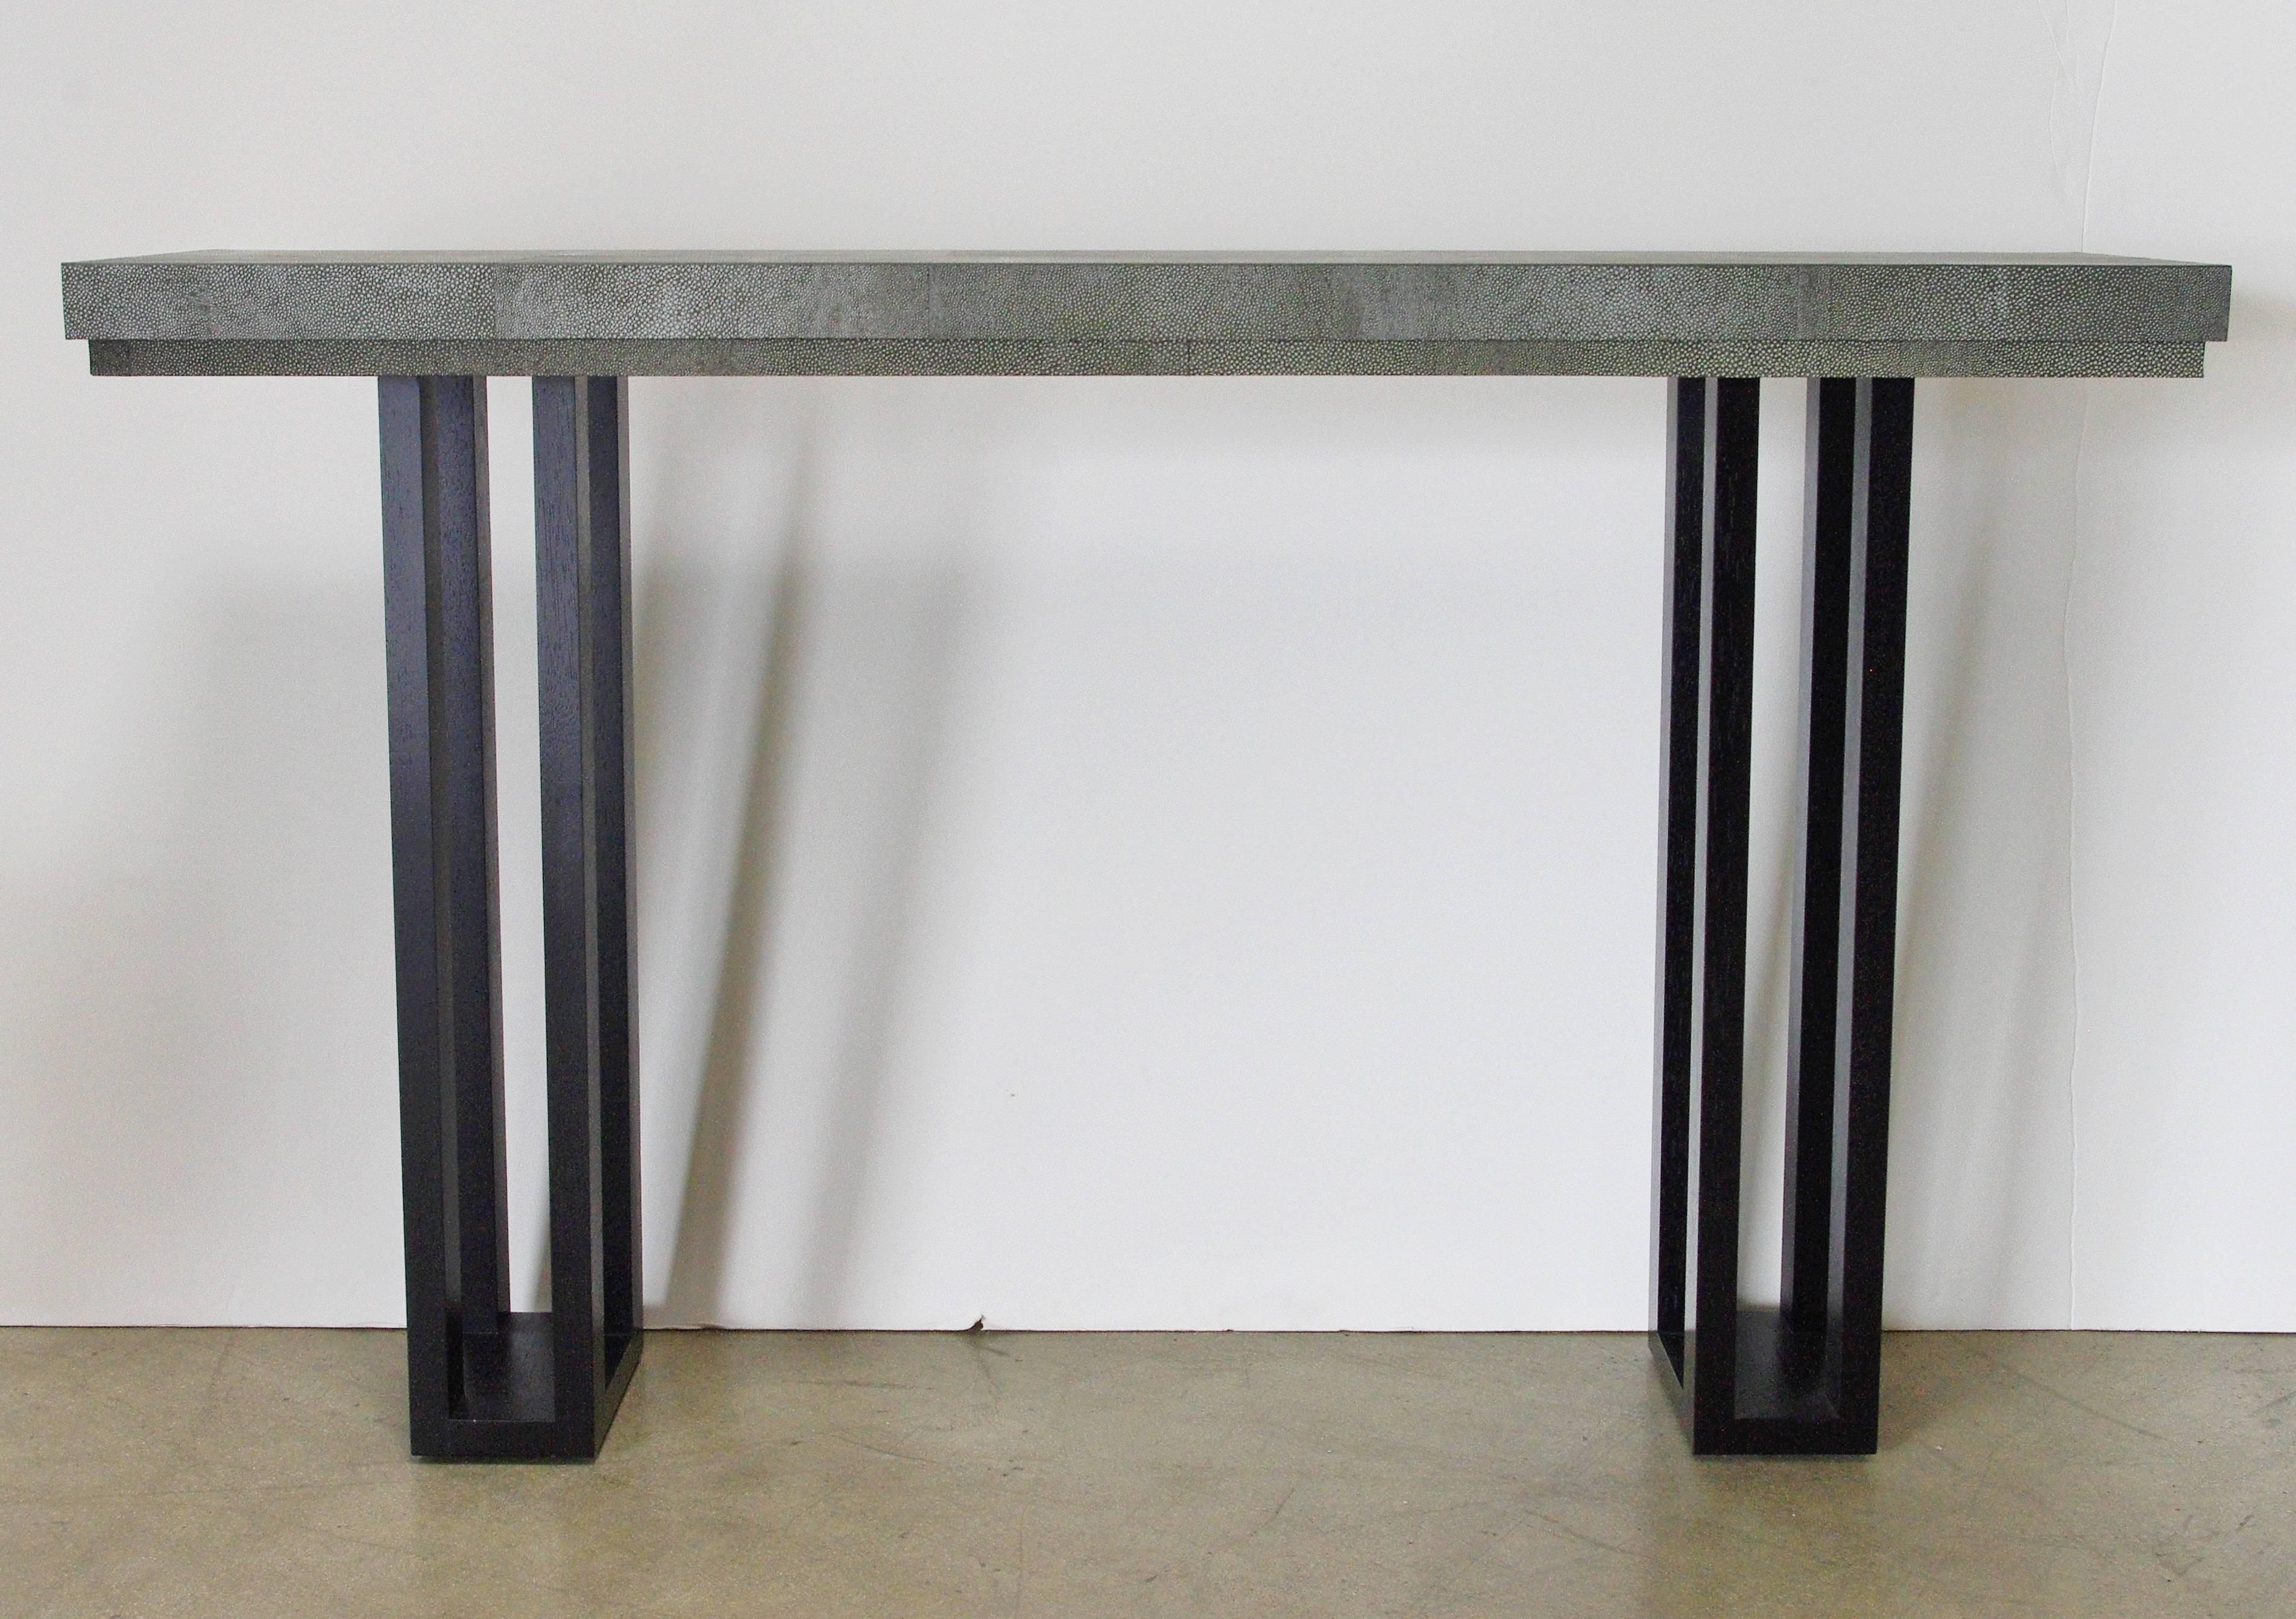 Grey green faux shagreen leather covered wood top console table with black wooden legs. 
Can be custom ordered.